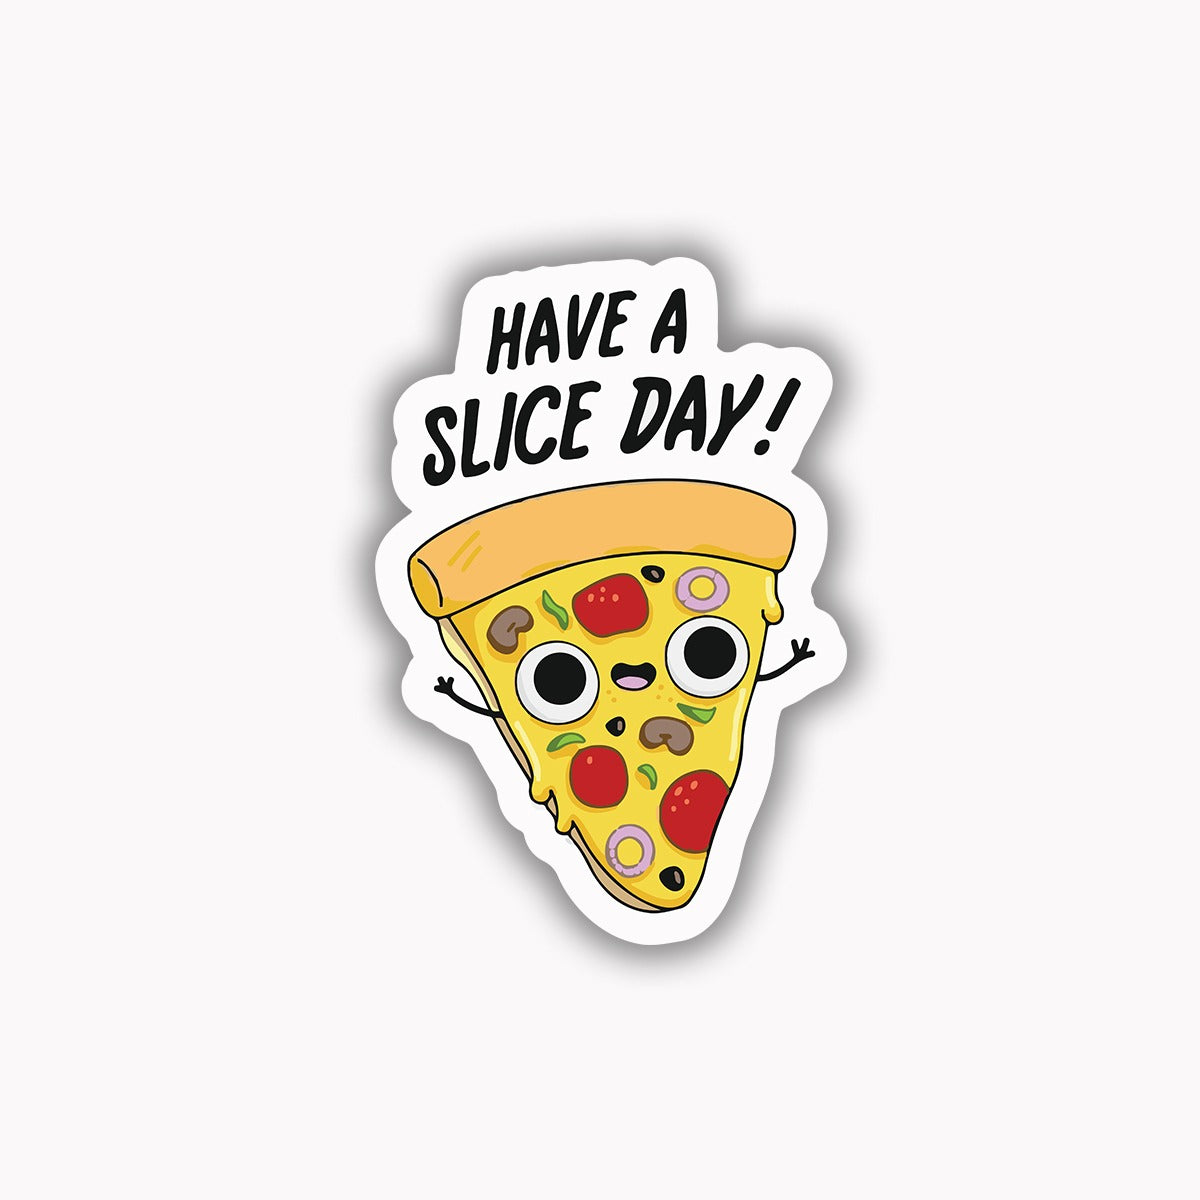 Have a pizza slice day